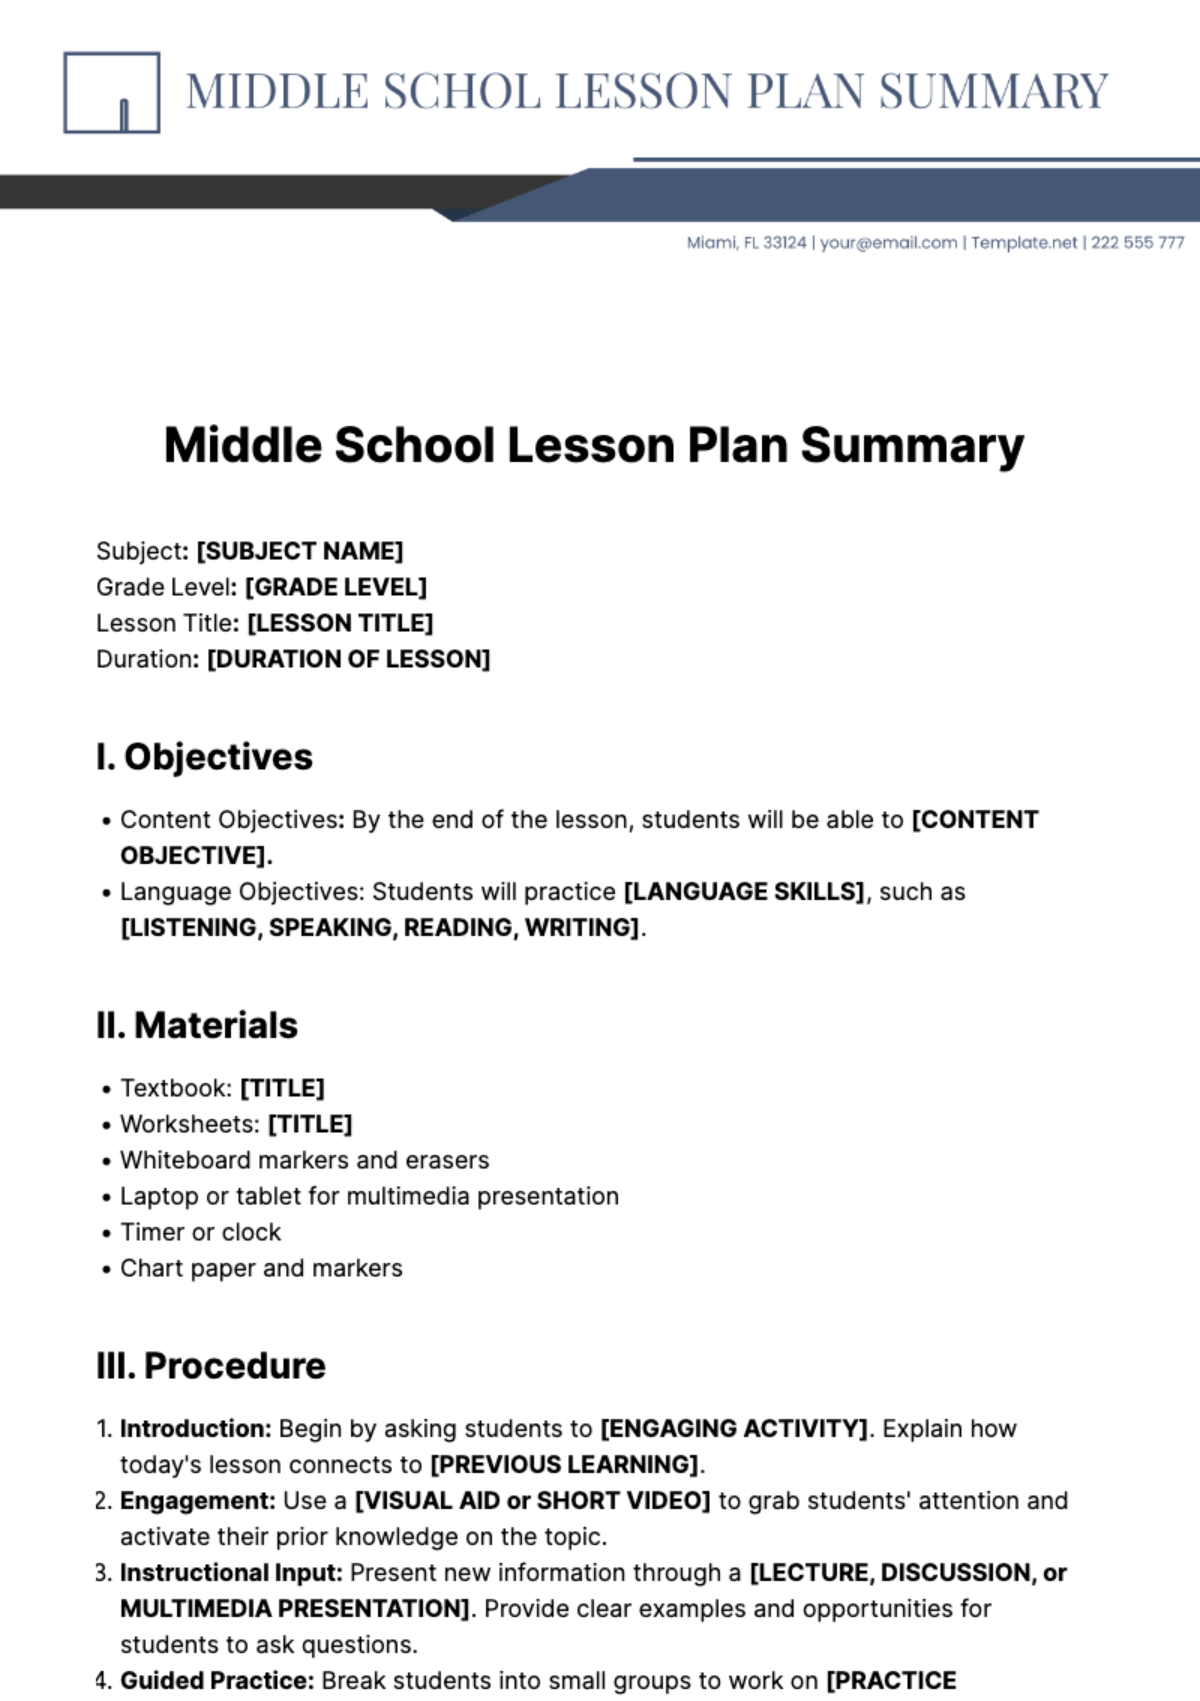 Middle School Lesson Plan Summary Template